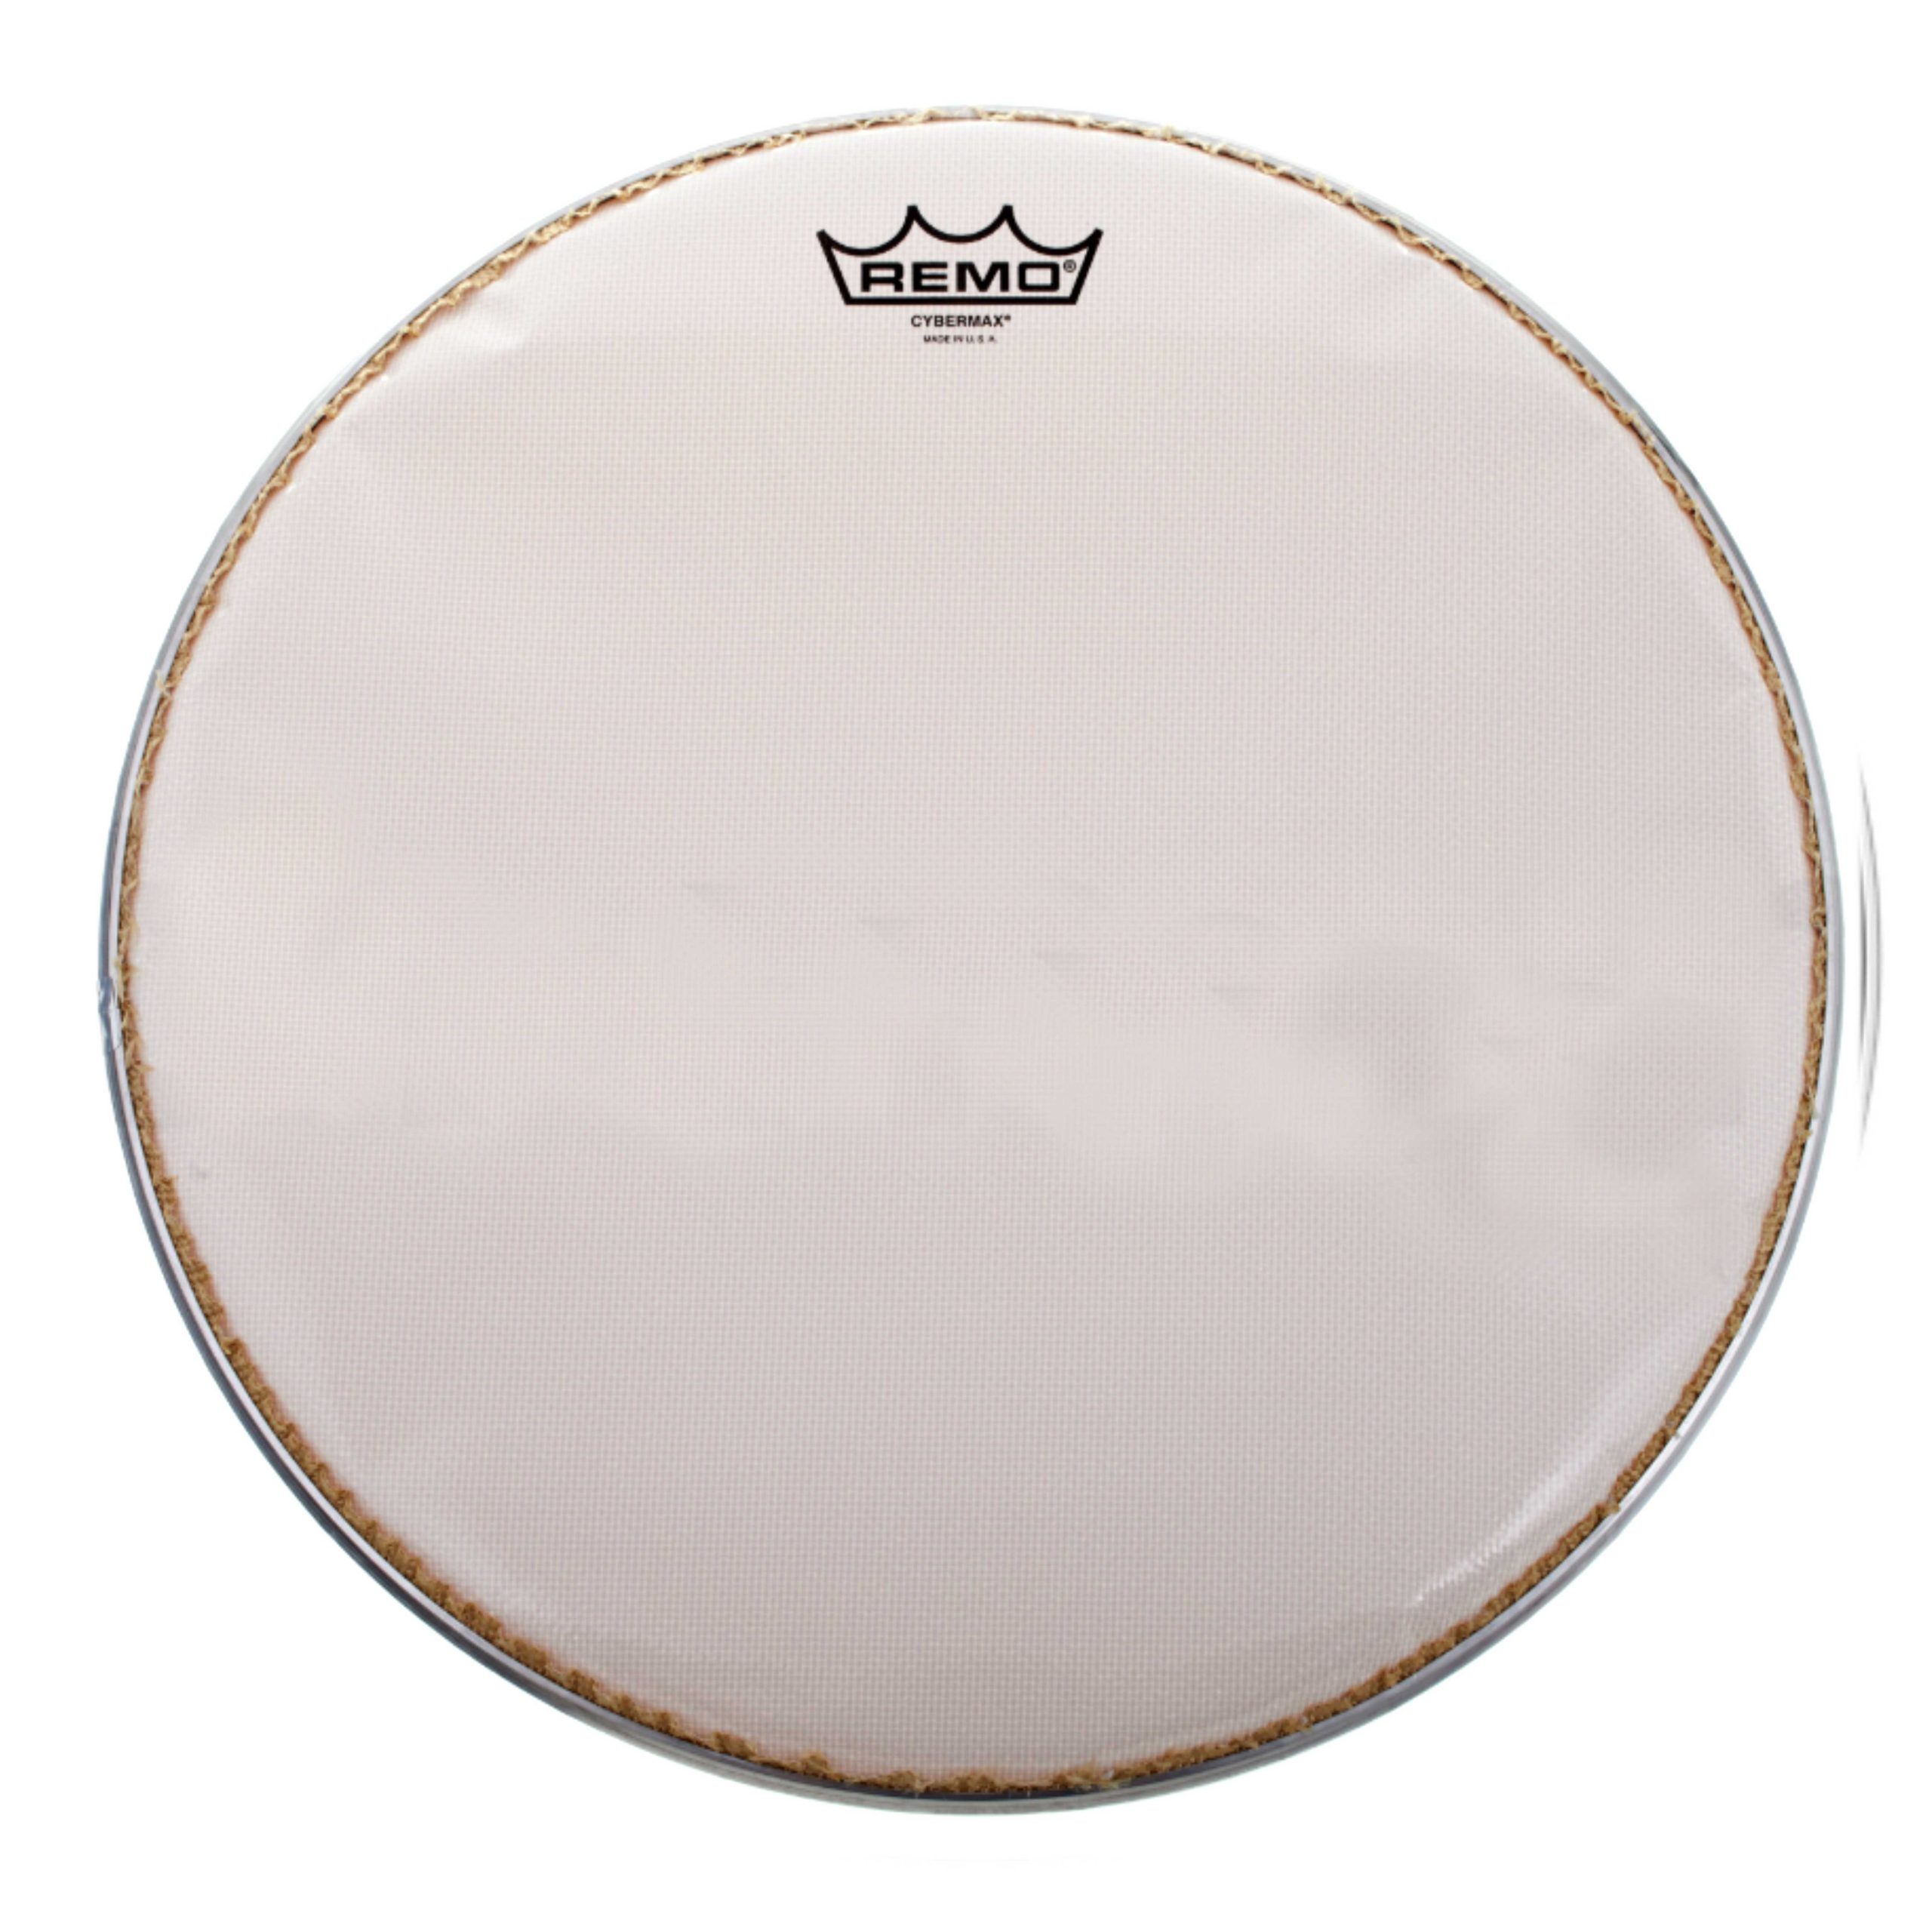 Remo Cybermax - 13" Marching Snare Drum Head